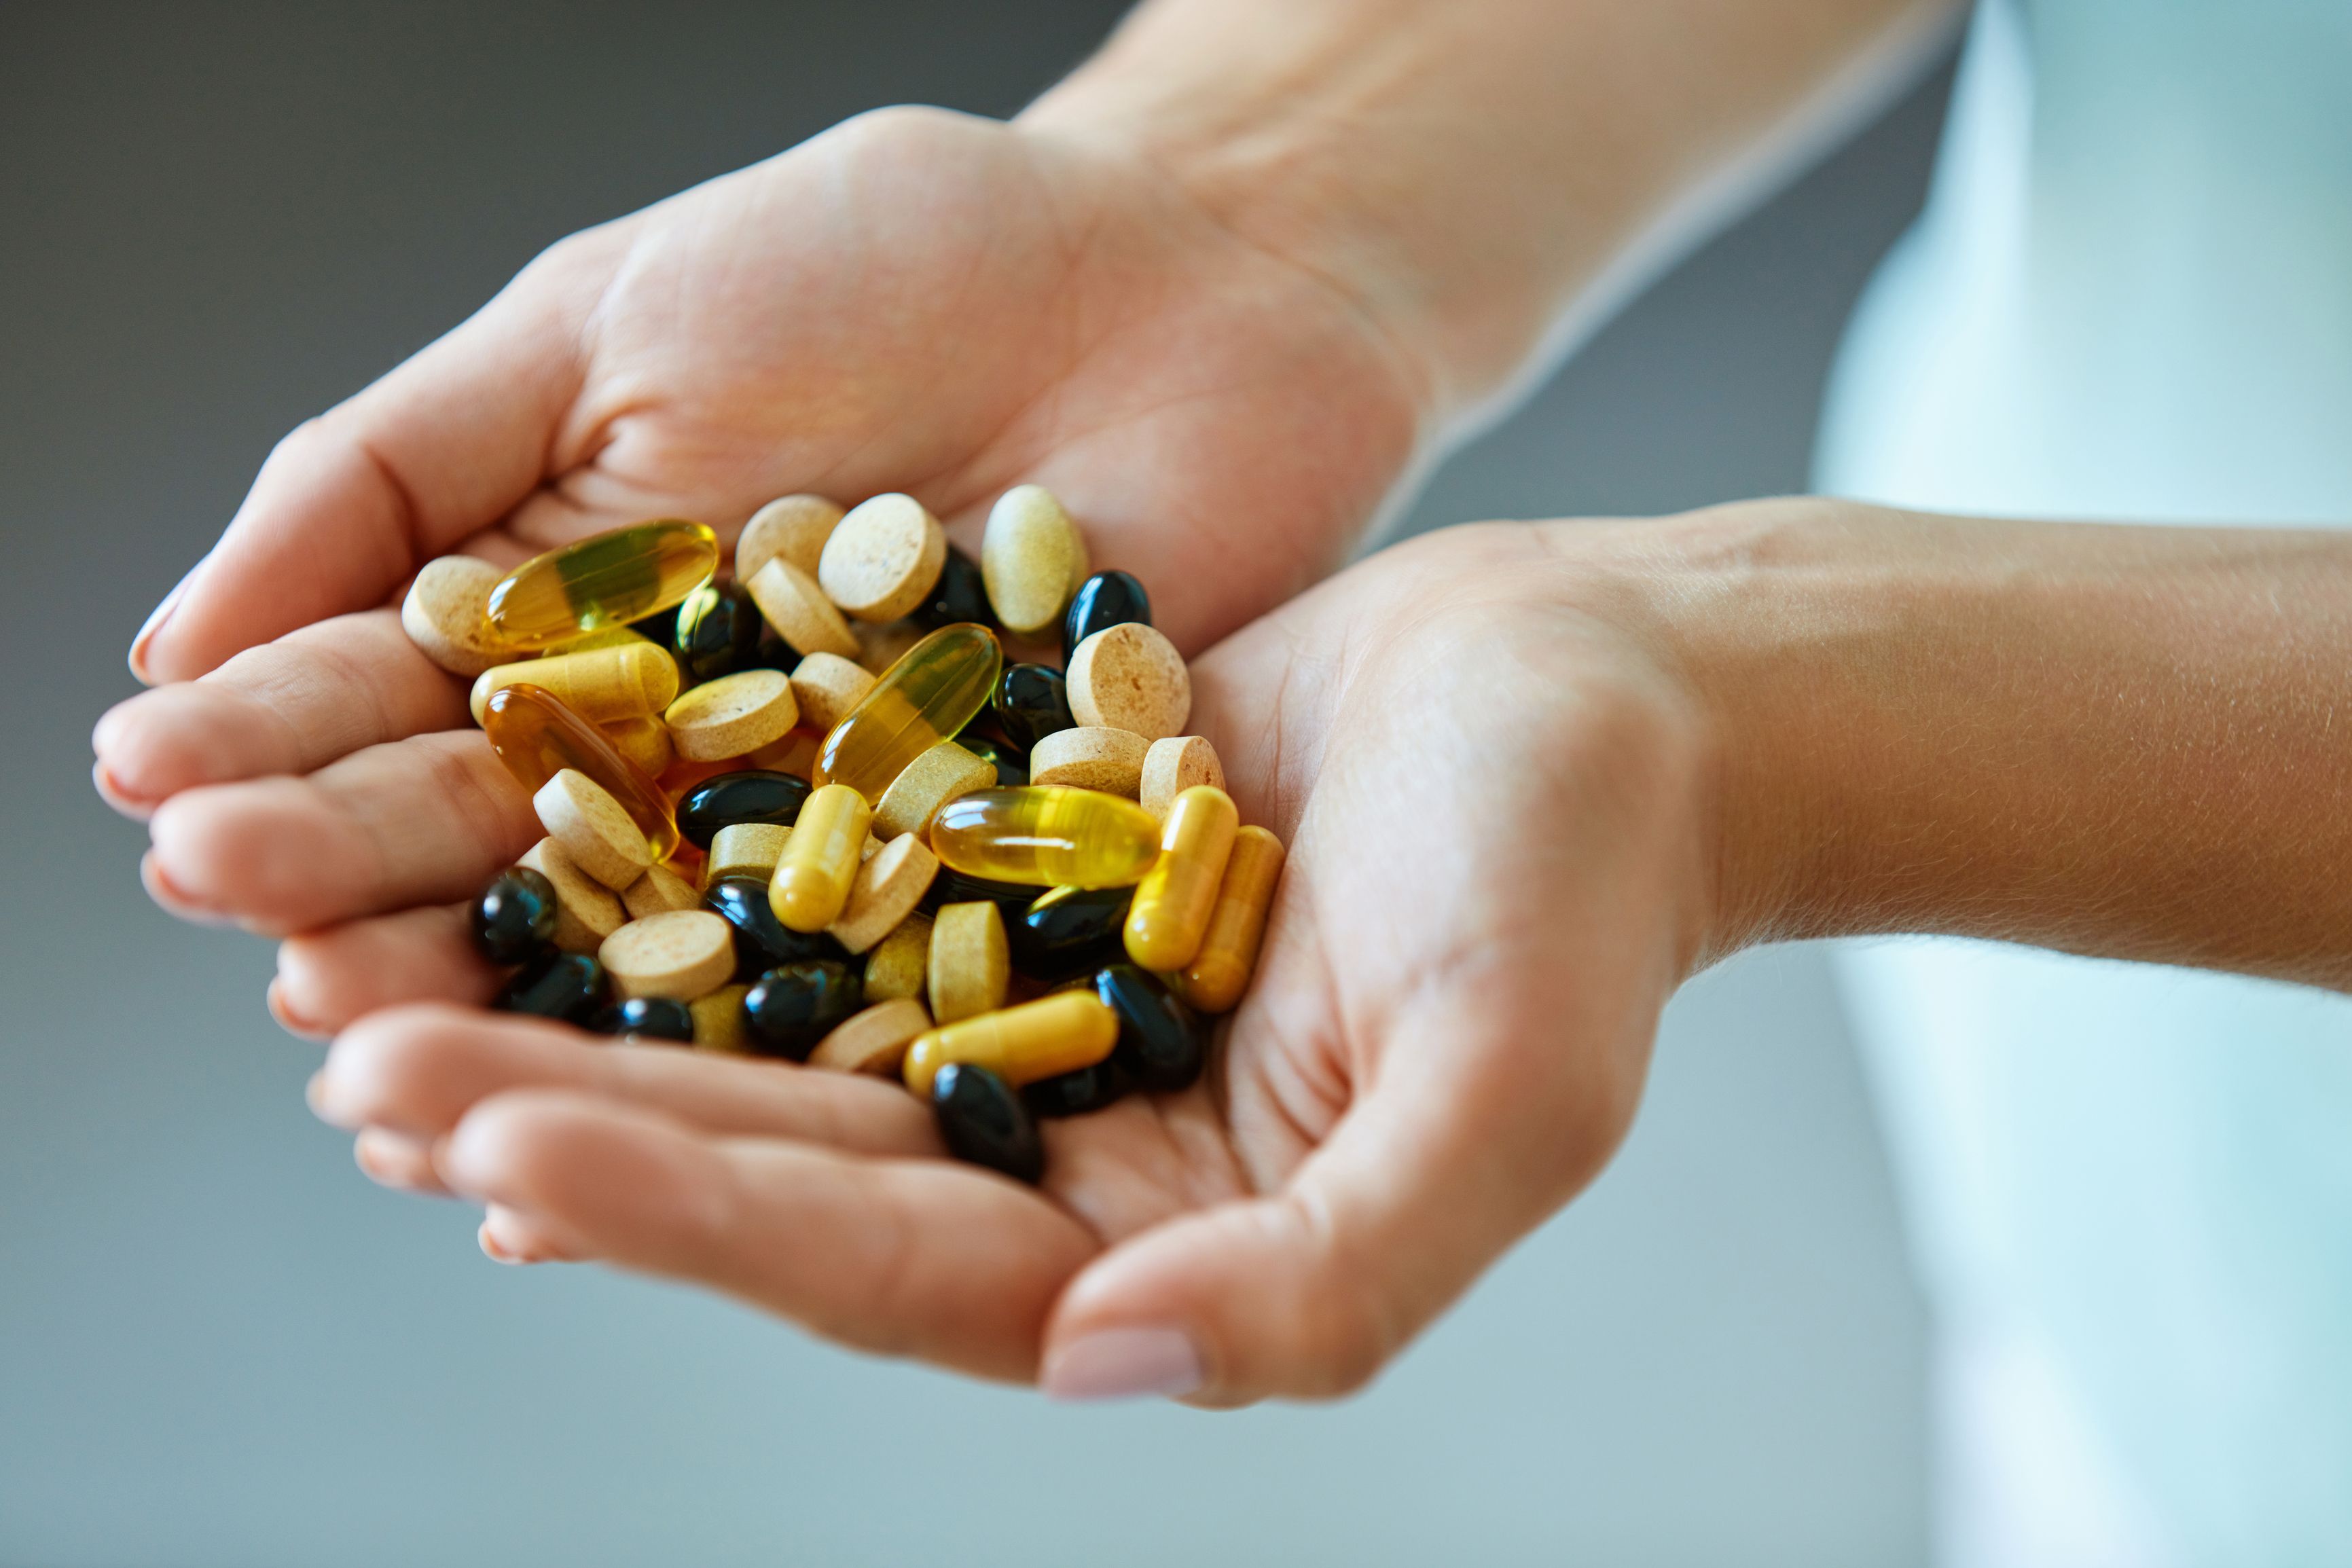 FREE MULTIVITAMINS FOR ALL PATIENTS!